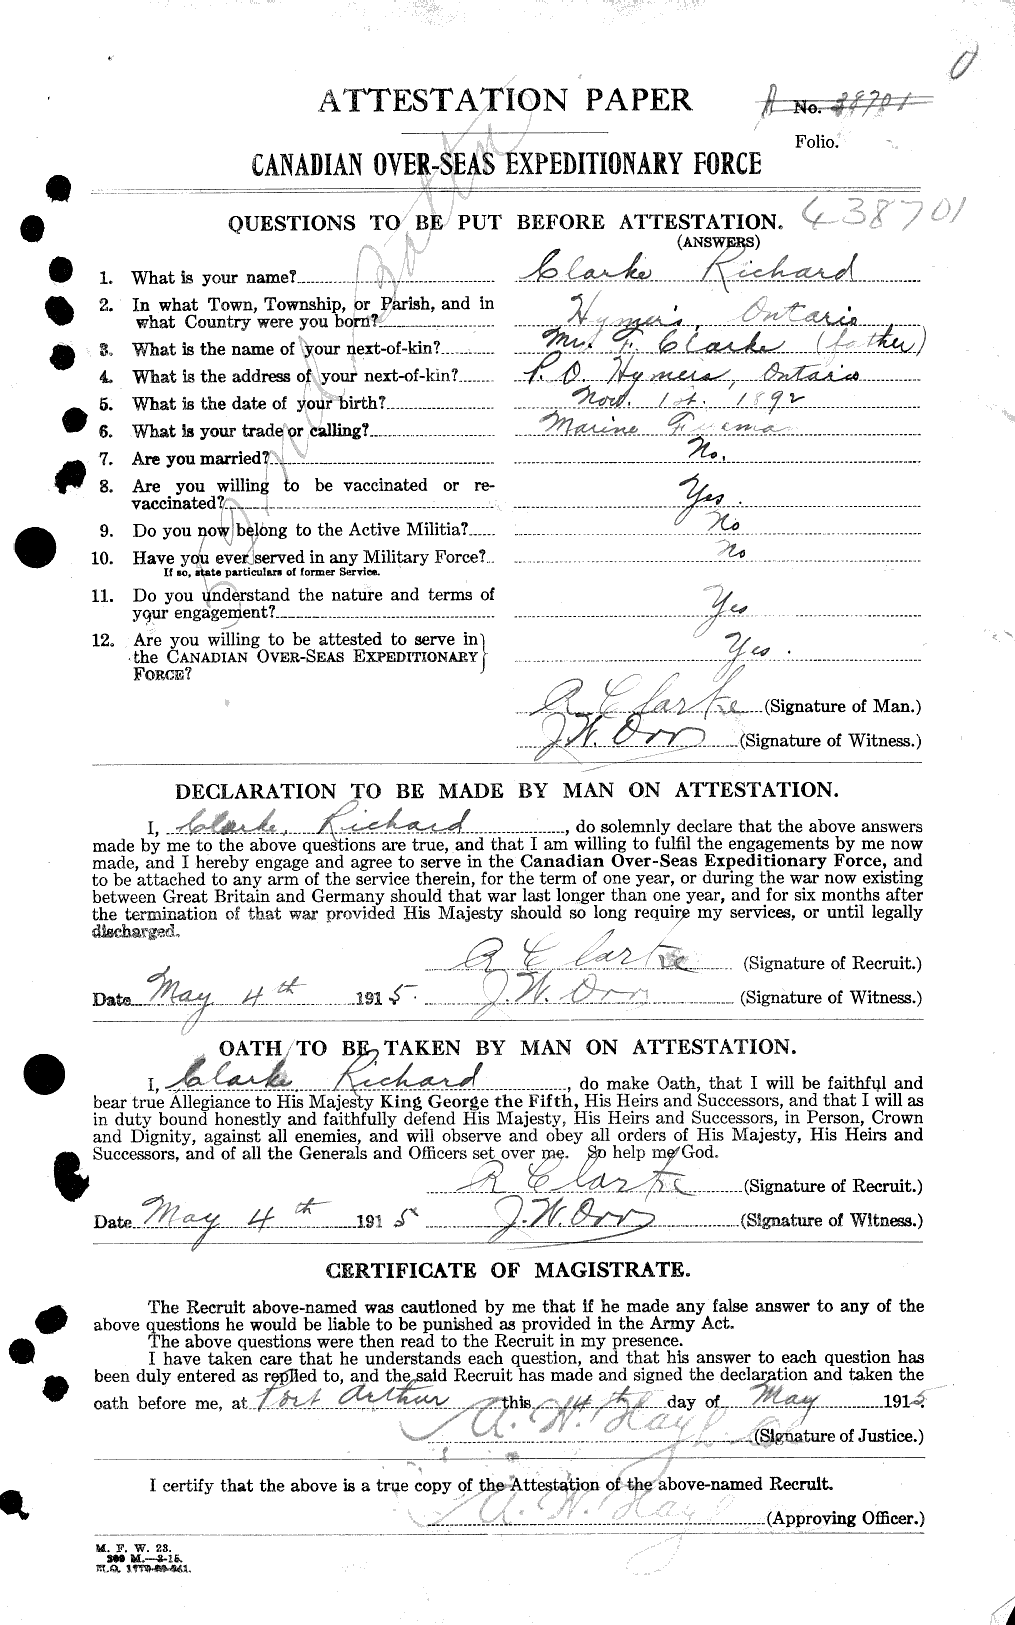 Personnel Records of the First World War - CEF 018648a